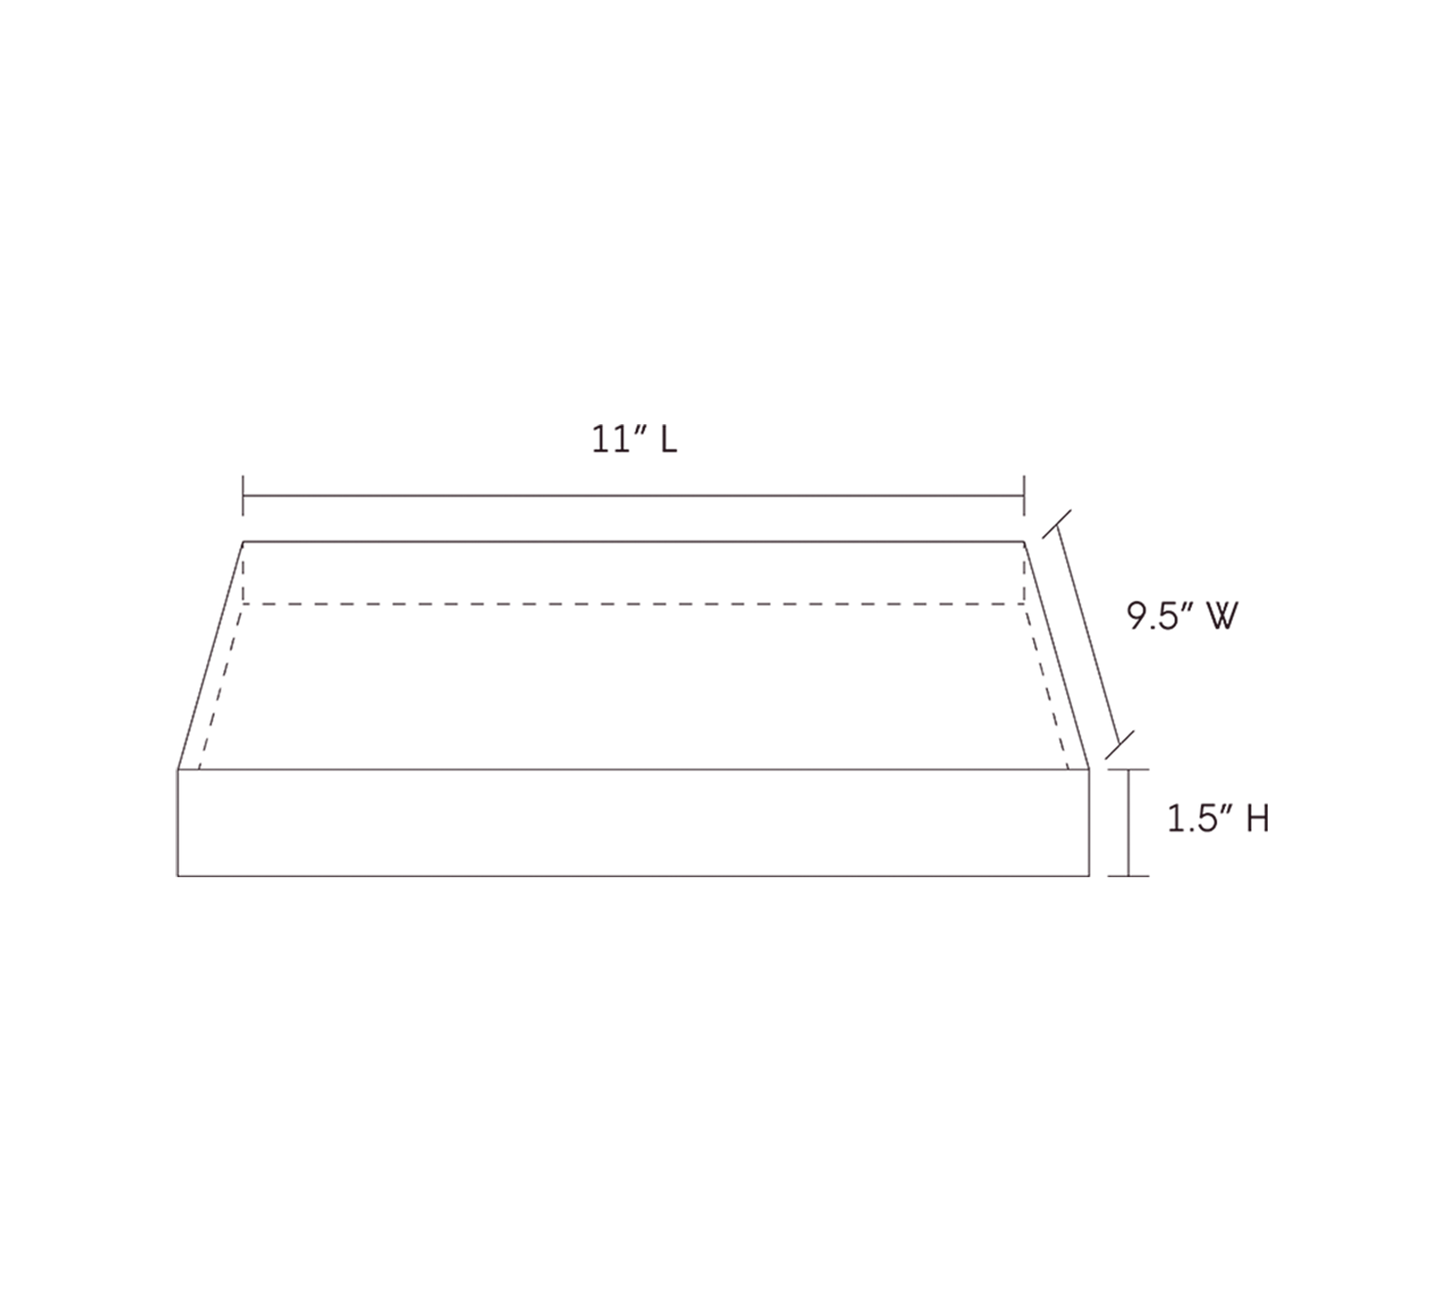 A line drawing of a fire safe tray that show dimensions of it being 11 inches in length, 9.5 inches in width, and 1.5 inches in height